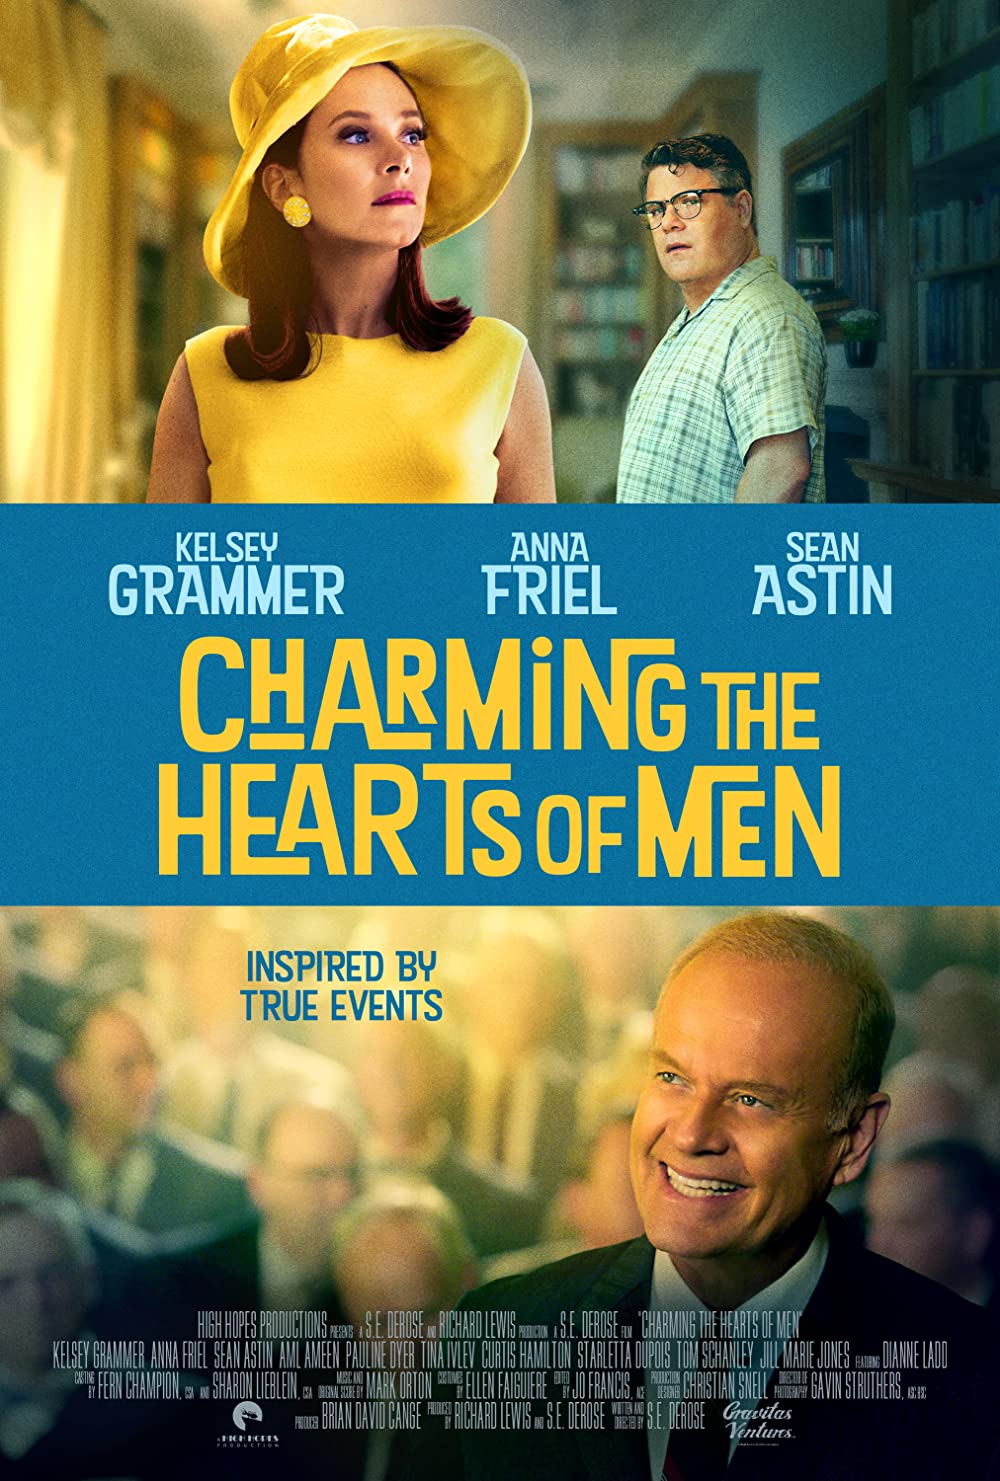 Cover Art for "Charming the Hearts of Men"